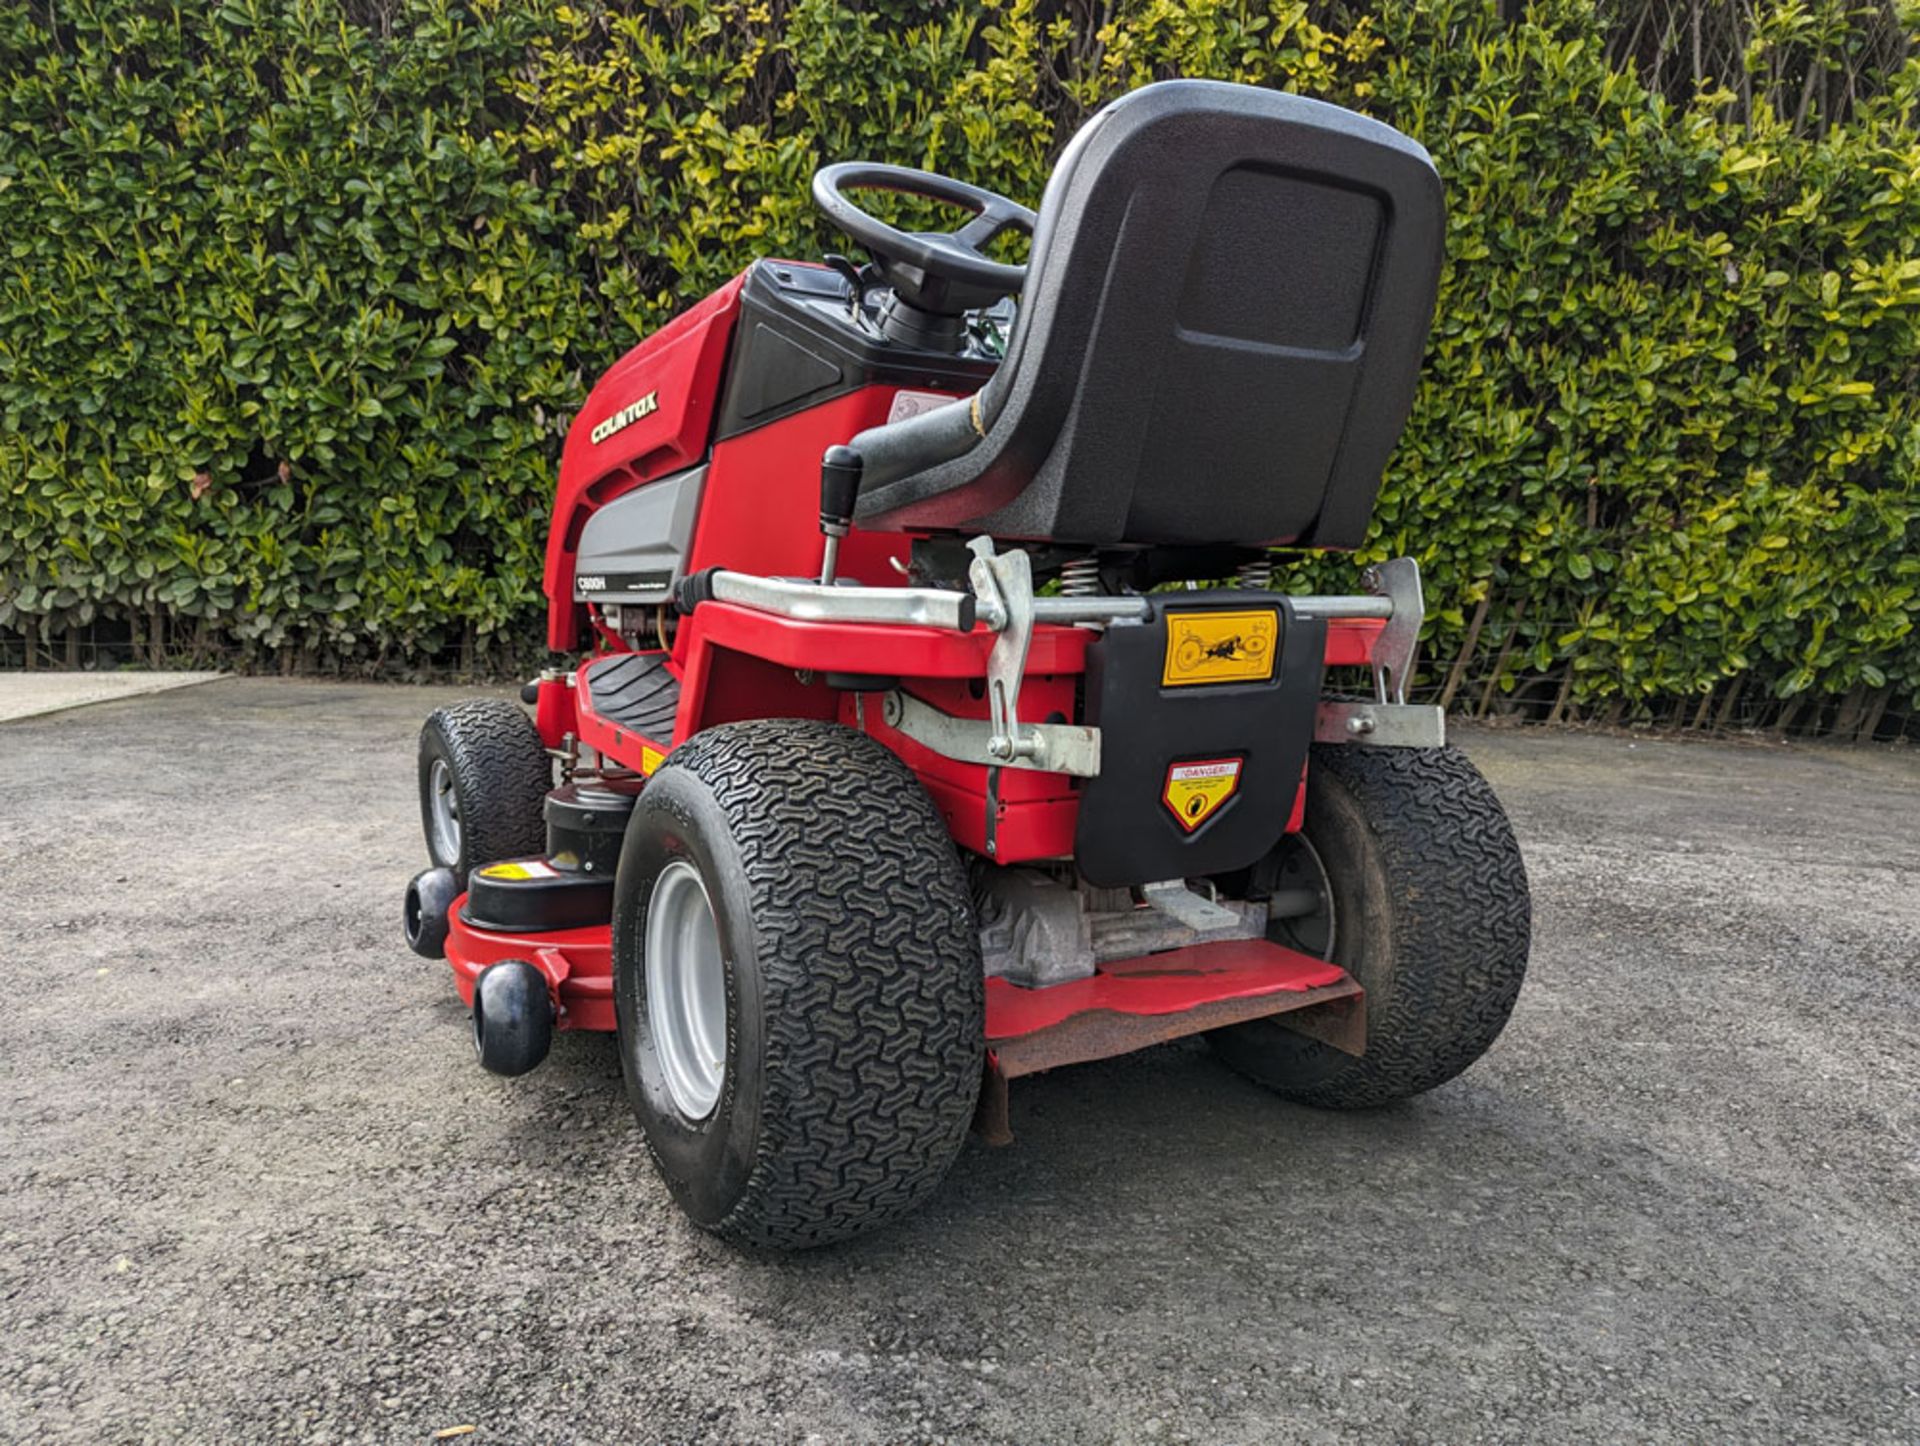 Countax C600H 44" Rear Discharge Garden Tractor - Image 5 of 8